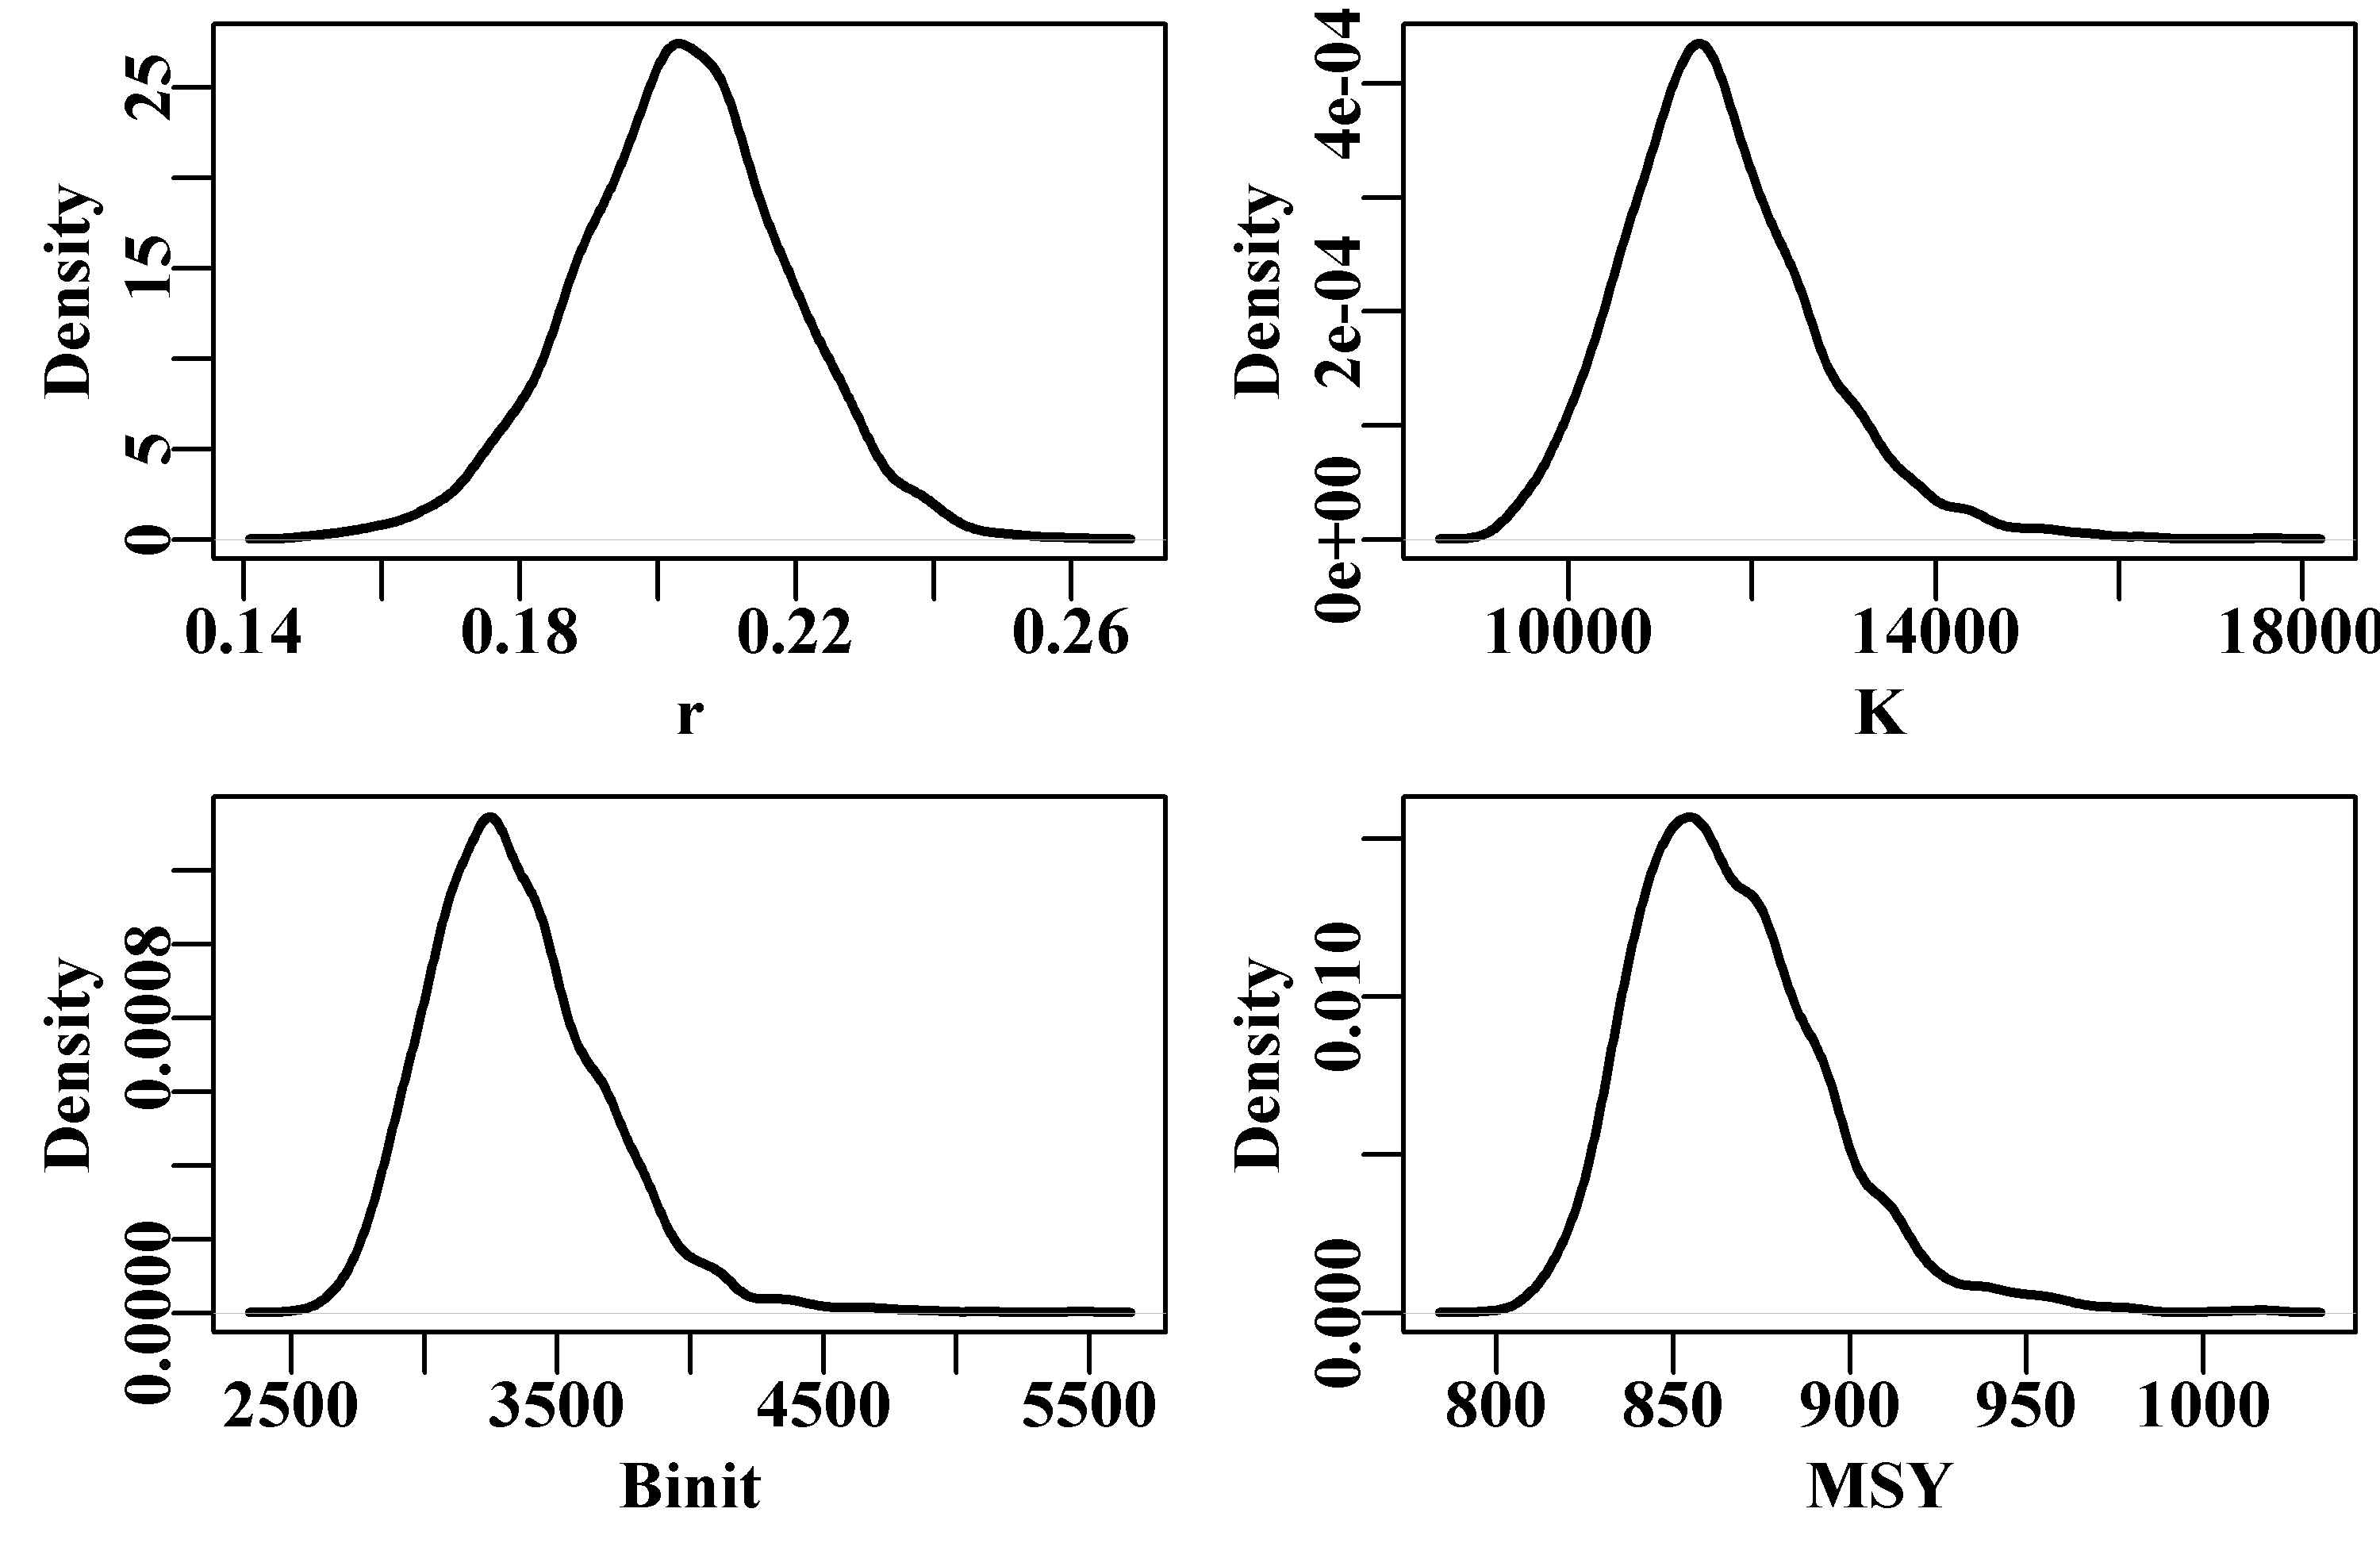 The marginal distributions for three parameters and the implied MSY from 2000 MCMC replicates for the Fox model applied to the abdat data. The lumpiness of the curves suggests more than 2000 iterations are needed.